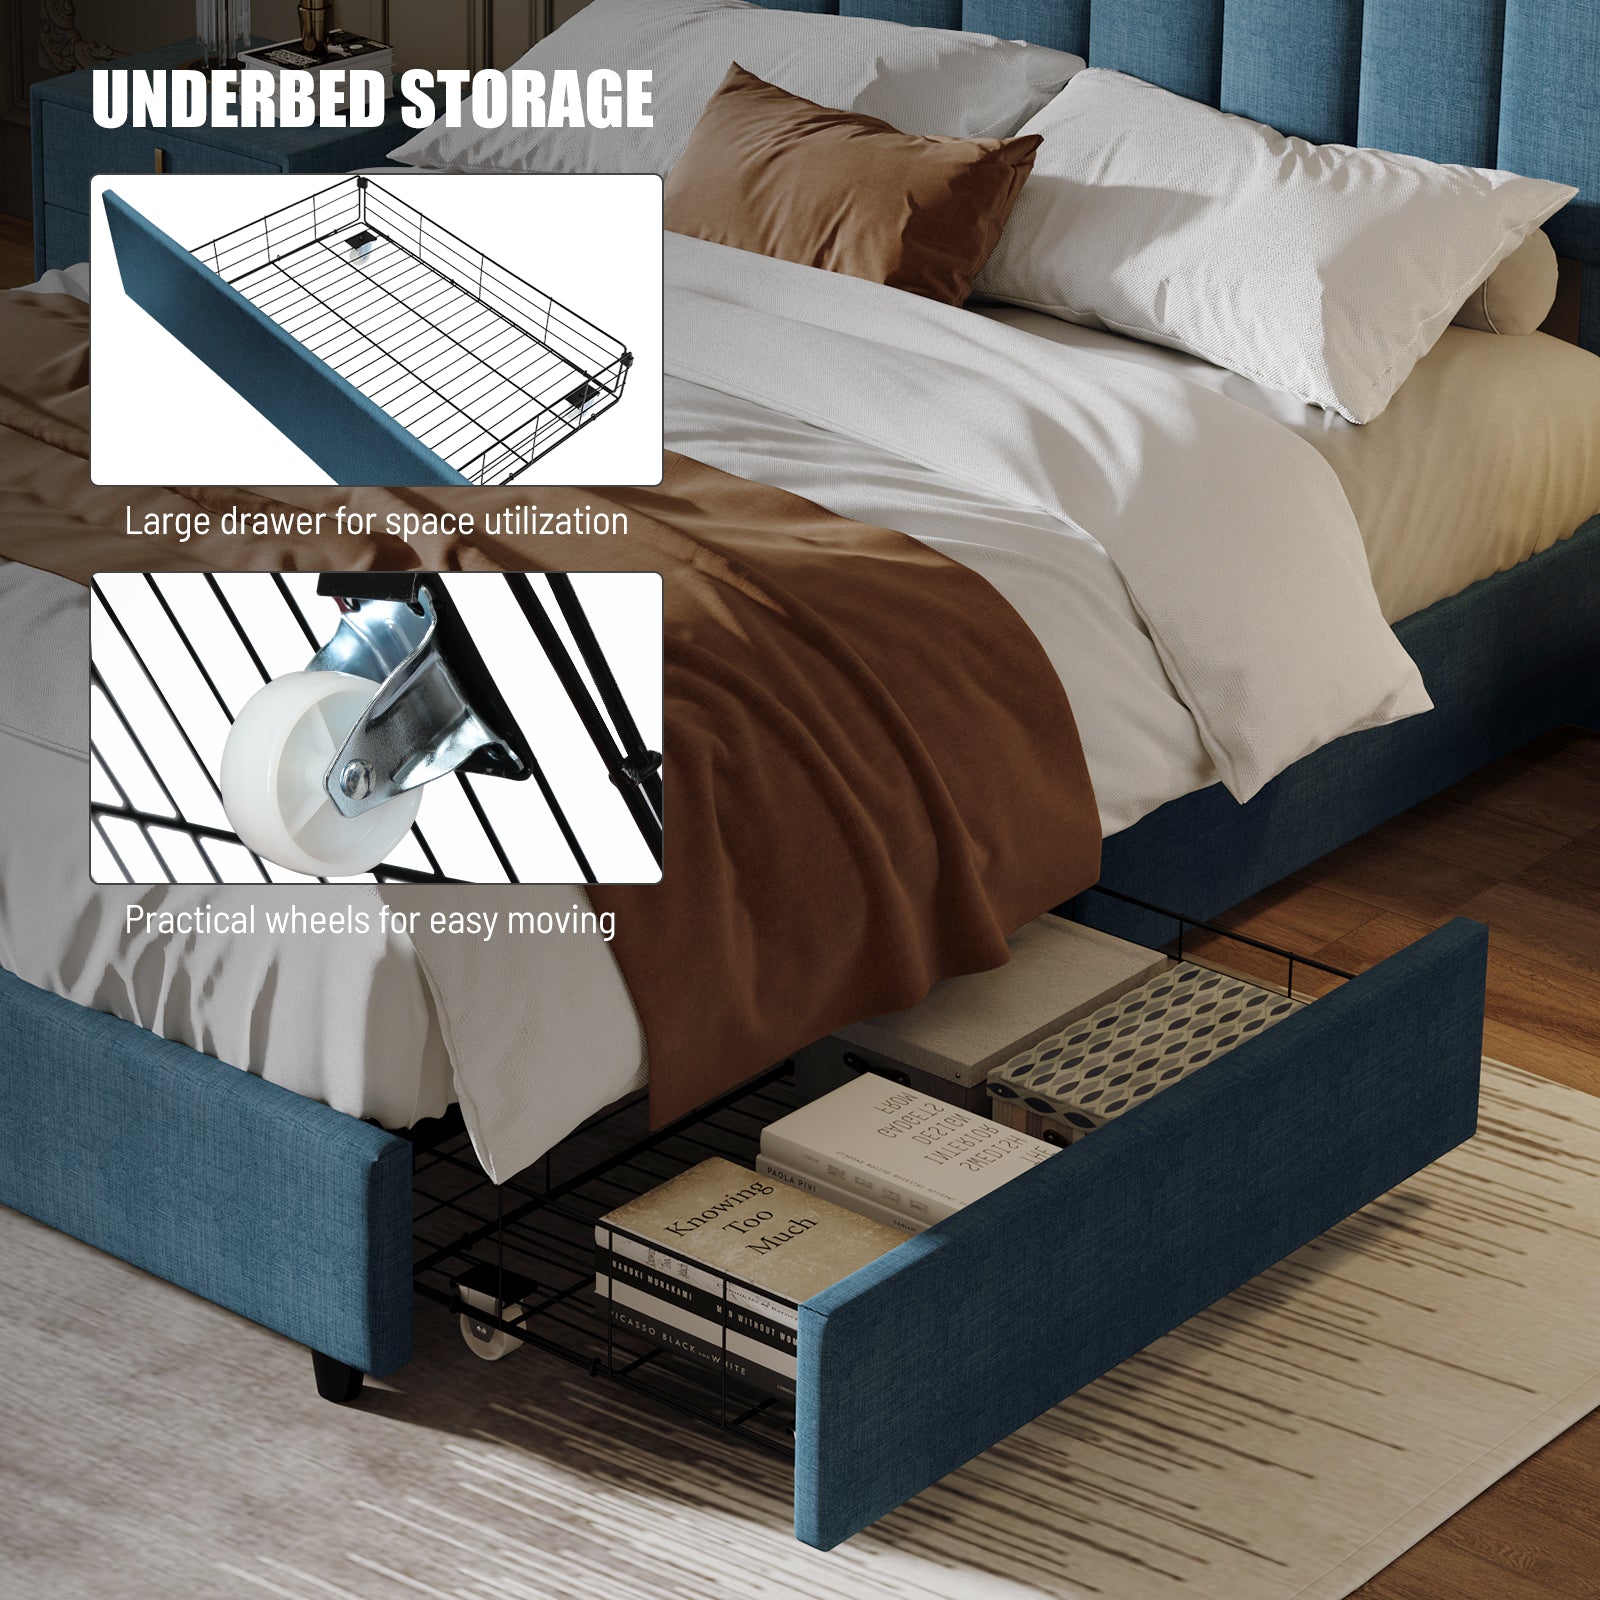 ZNTS Queen Size Upholstered Platform Bed Linen Bed Frame with 2 Drawers Stitched Padded Headboard with W69167519